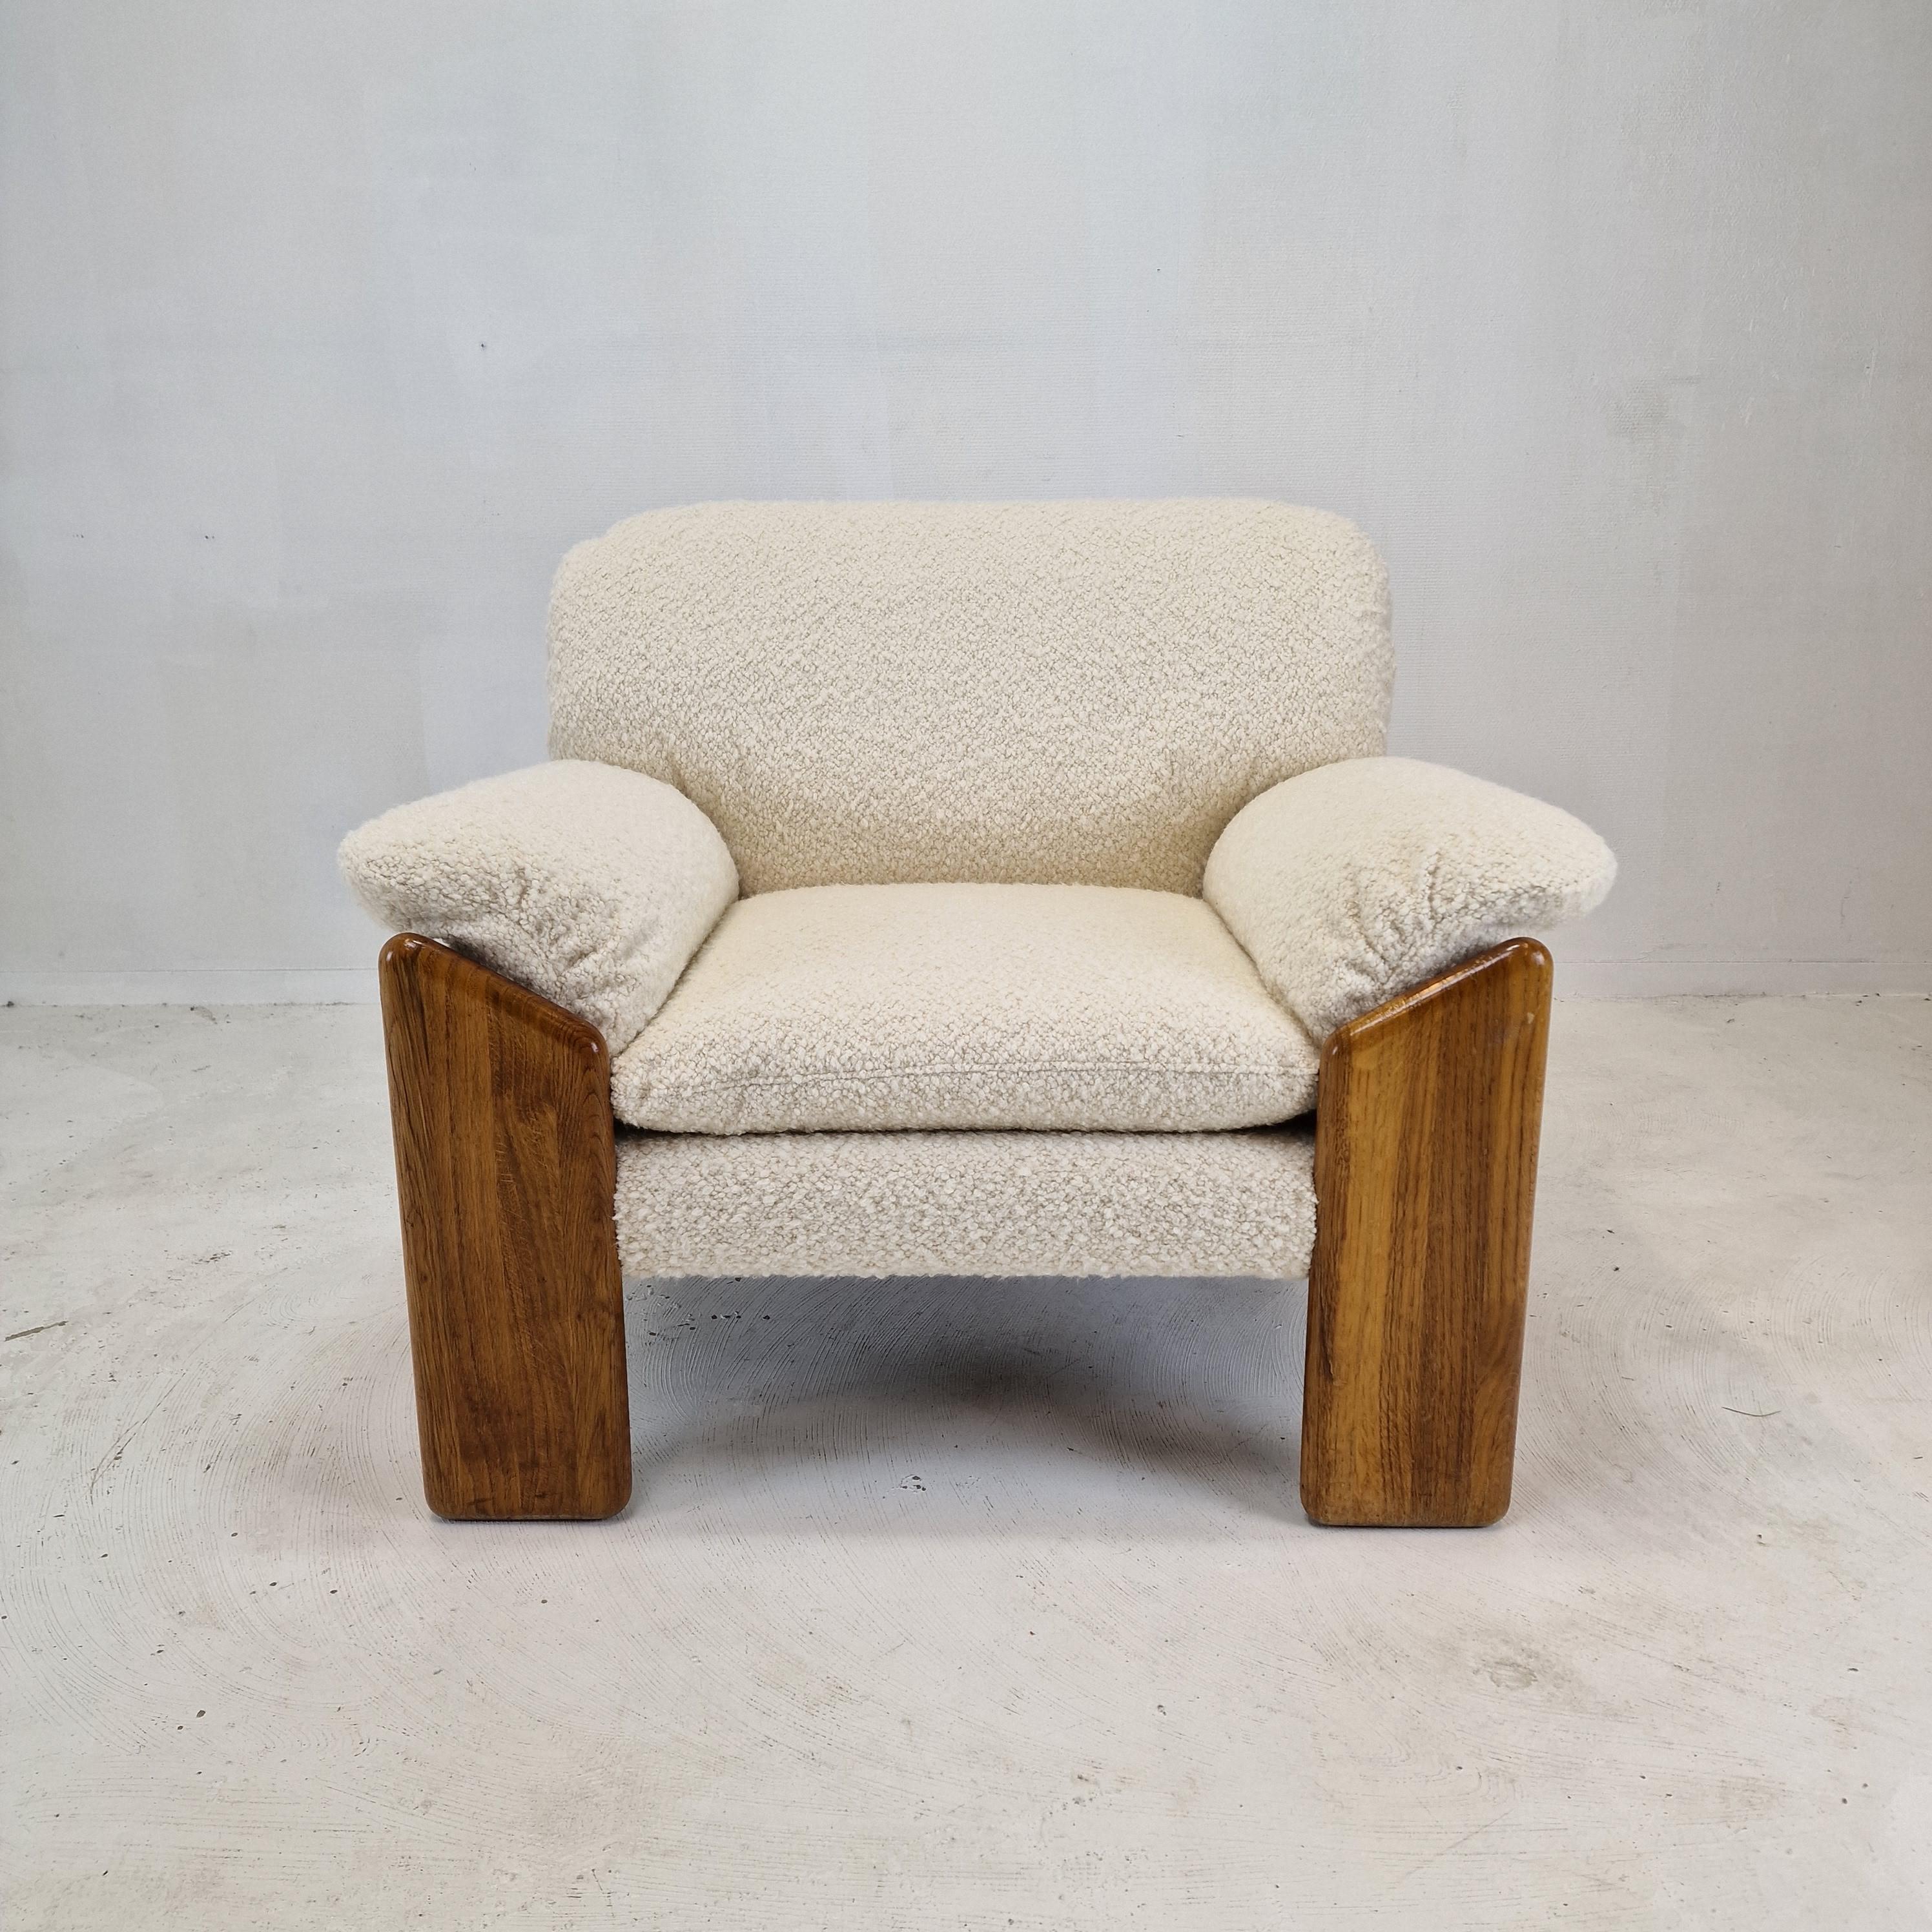 A beautiful walnut chair, designed by Mario Marenco for Mobil Girgi, Italy 1970's.

Beautifully designed with angled front legs which extend to the sides and back, the back support is slightly curved. 
The rich grain of the wood contrasts